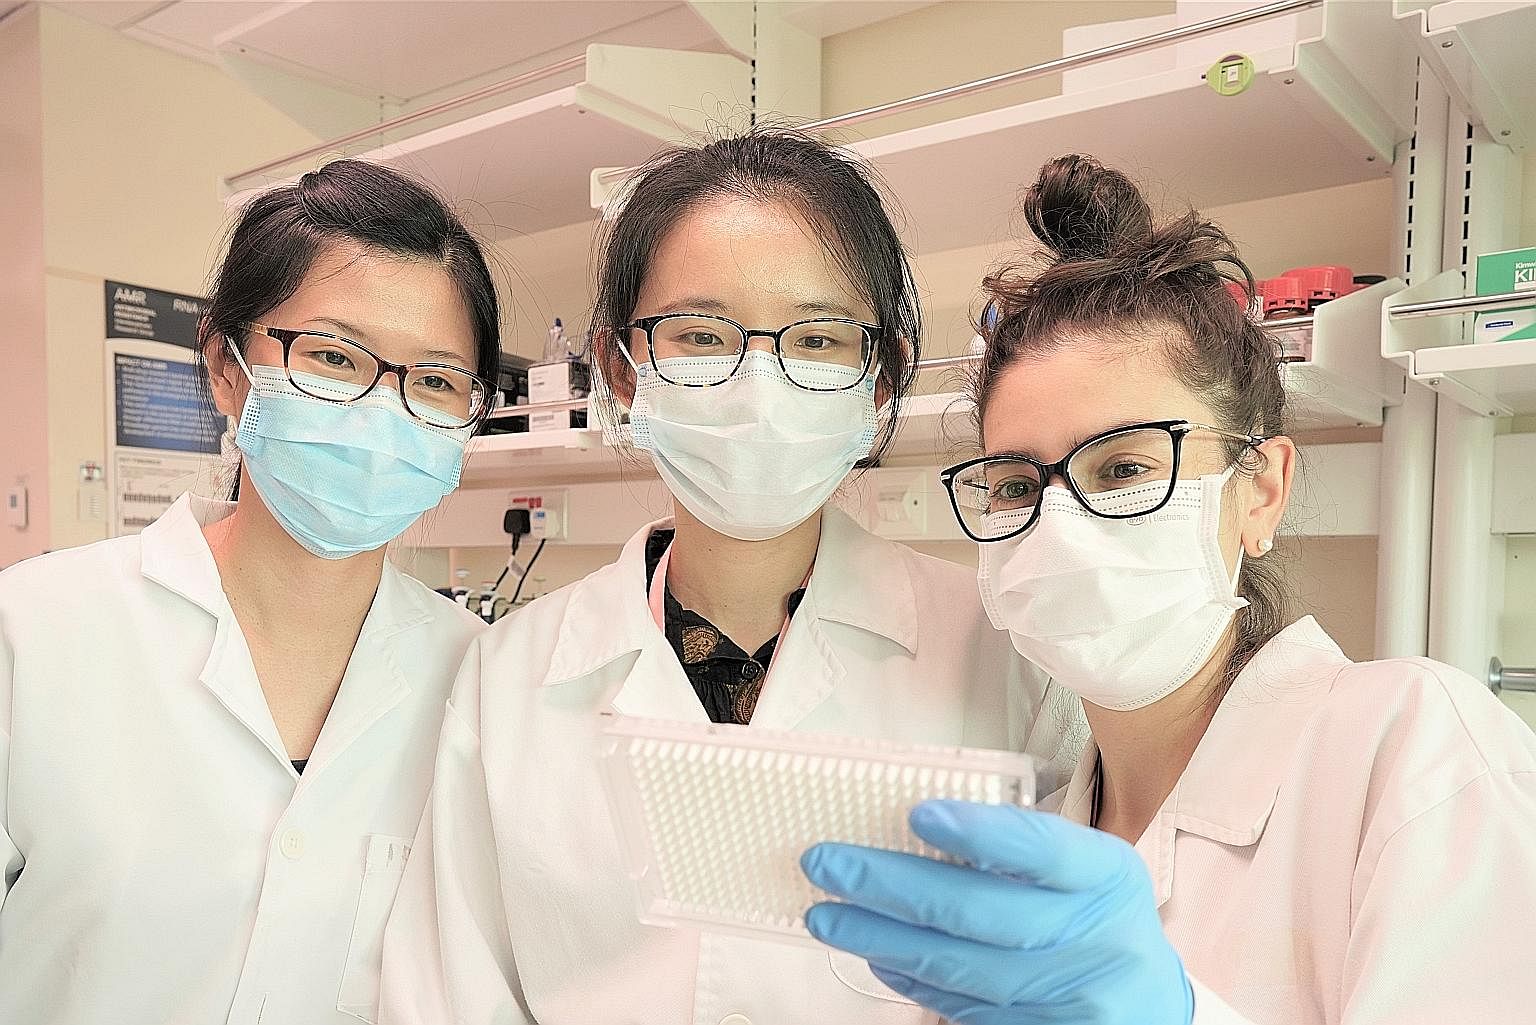 Singapore-MIT Alliance for Research and Technology researchers (from left) Lee Wei Lin, Gu Xiaoqiong and Federica Armas evaluating a 384-well plate set up for variant detection tests.